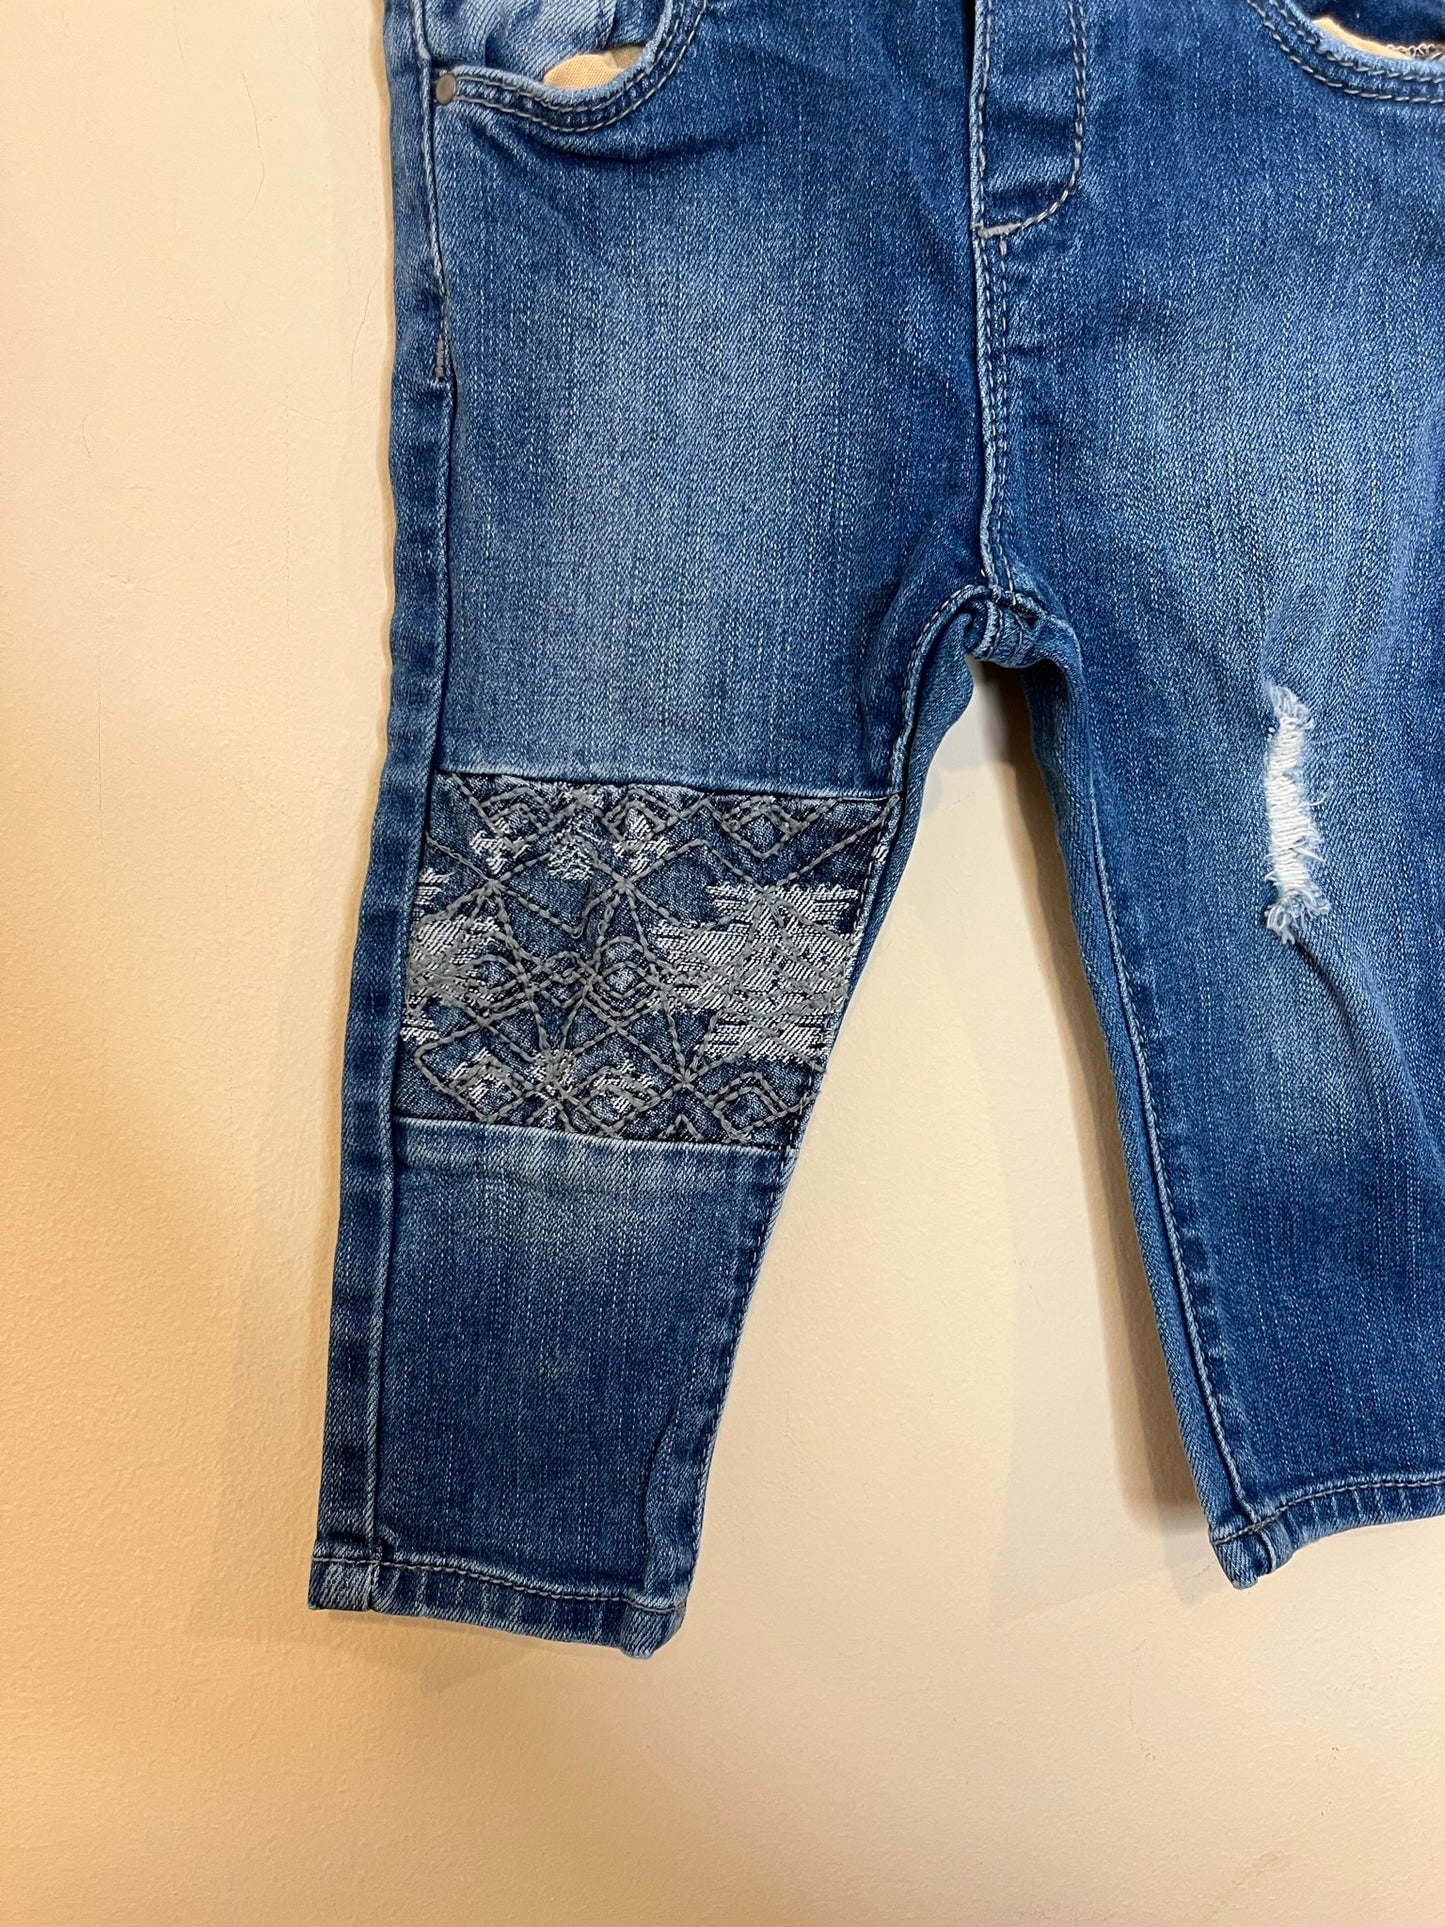 Zara Distressed Embroidered Jeans (6-9)